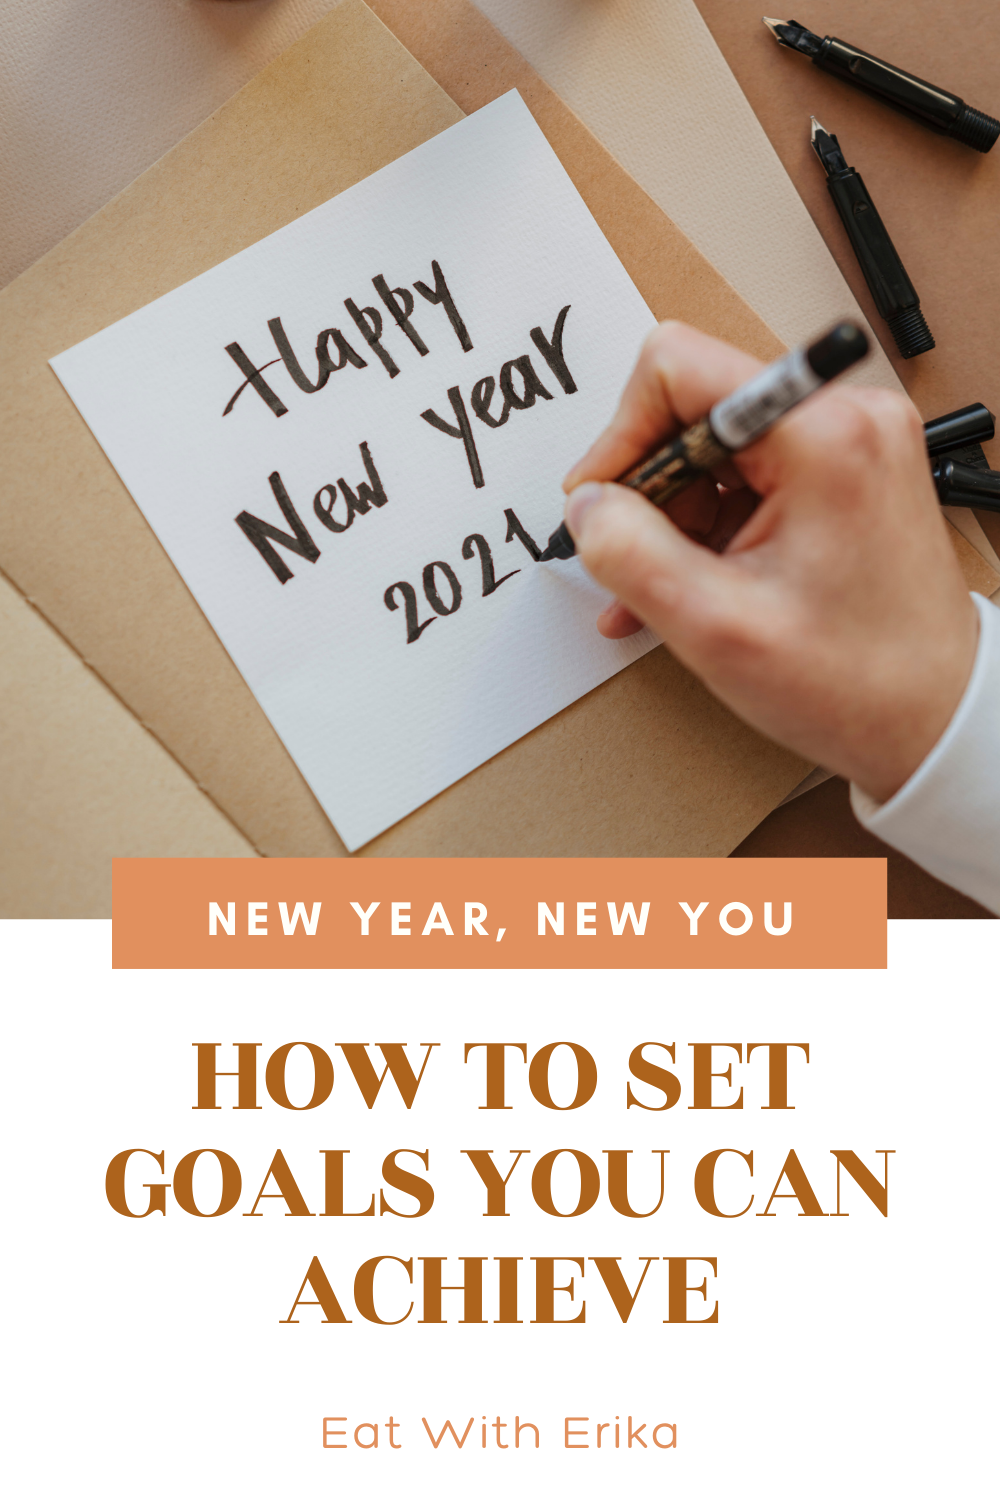 happy new year 2021, how to set goals you can achieve